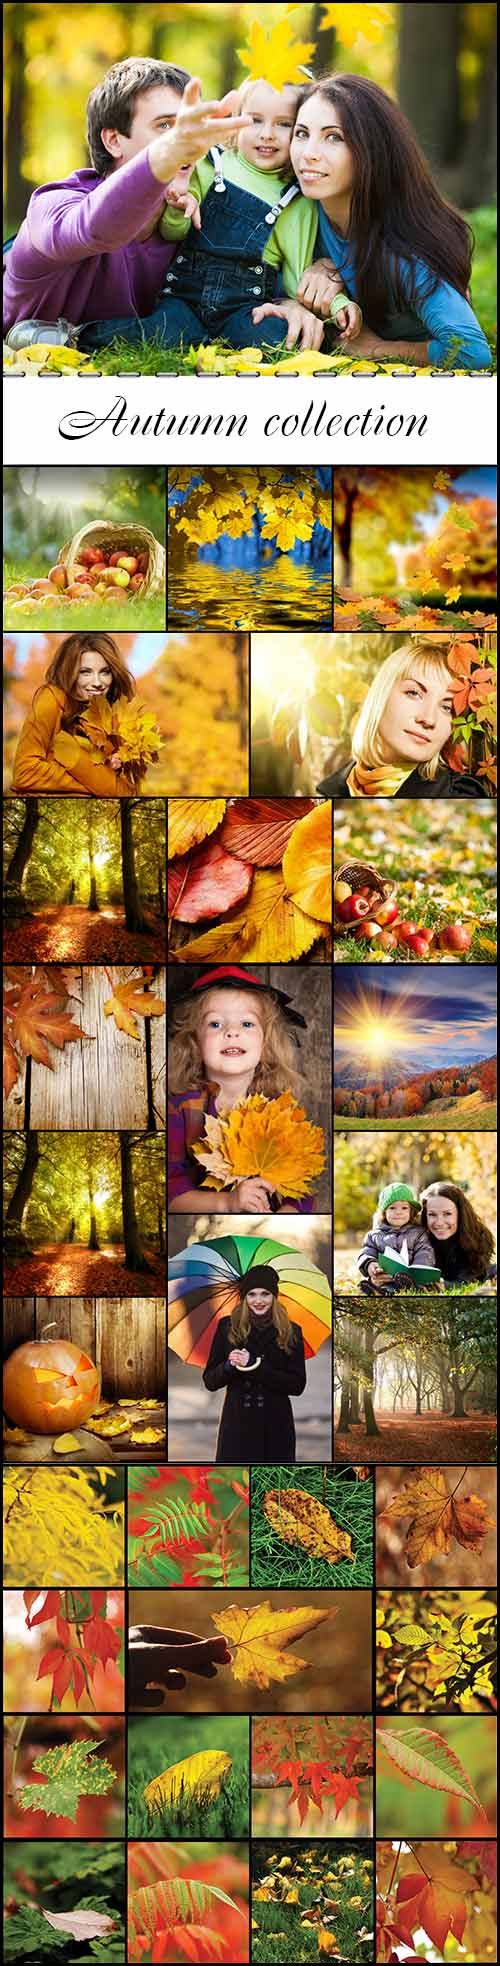 Autumn collection raster graphics